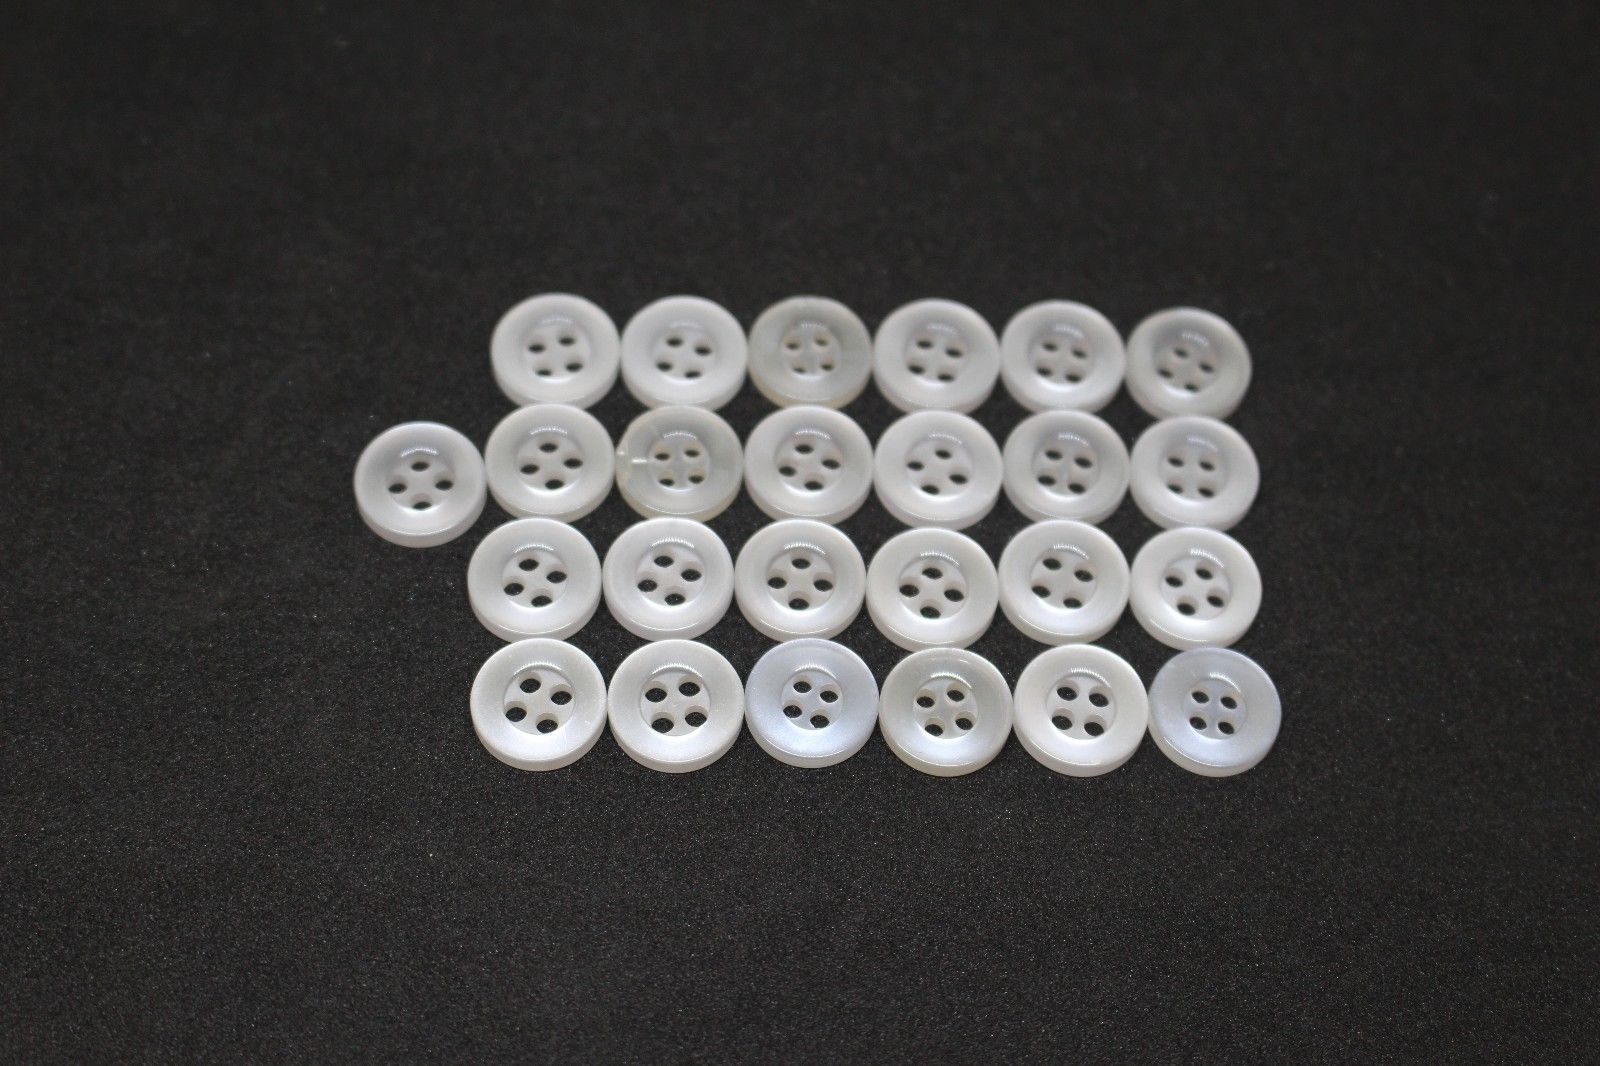 Army Dress Shirt Buttons, Color: White, Pkg of 25 – Military